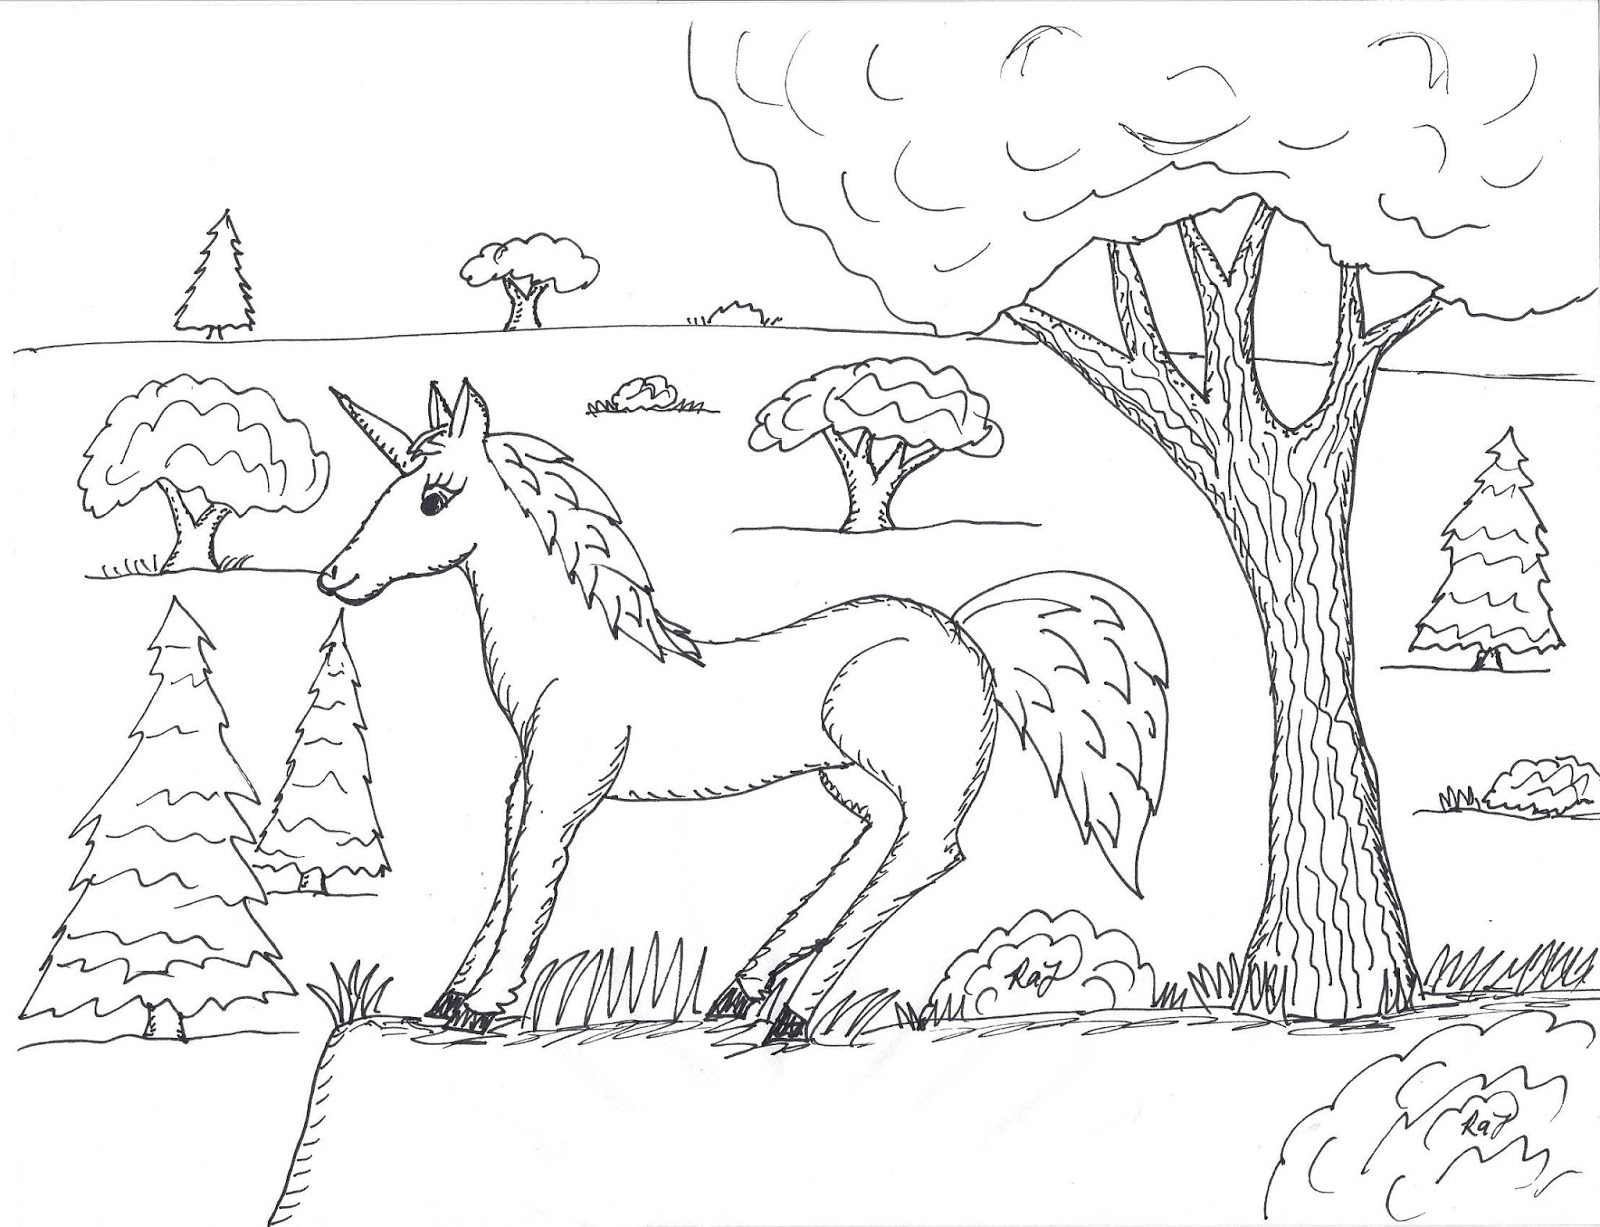 Robin's Great Coloring Pages: Unicorn coloring pages for Young Kids